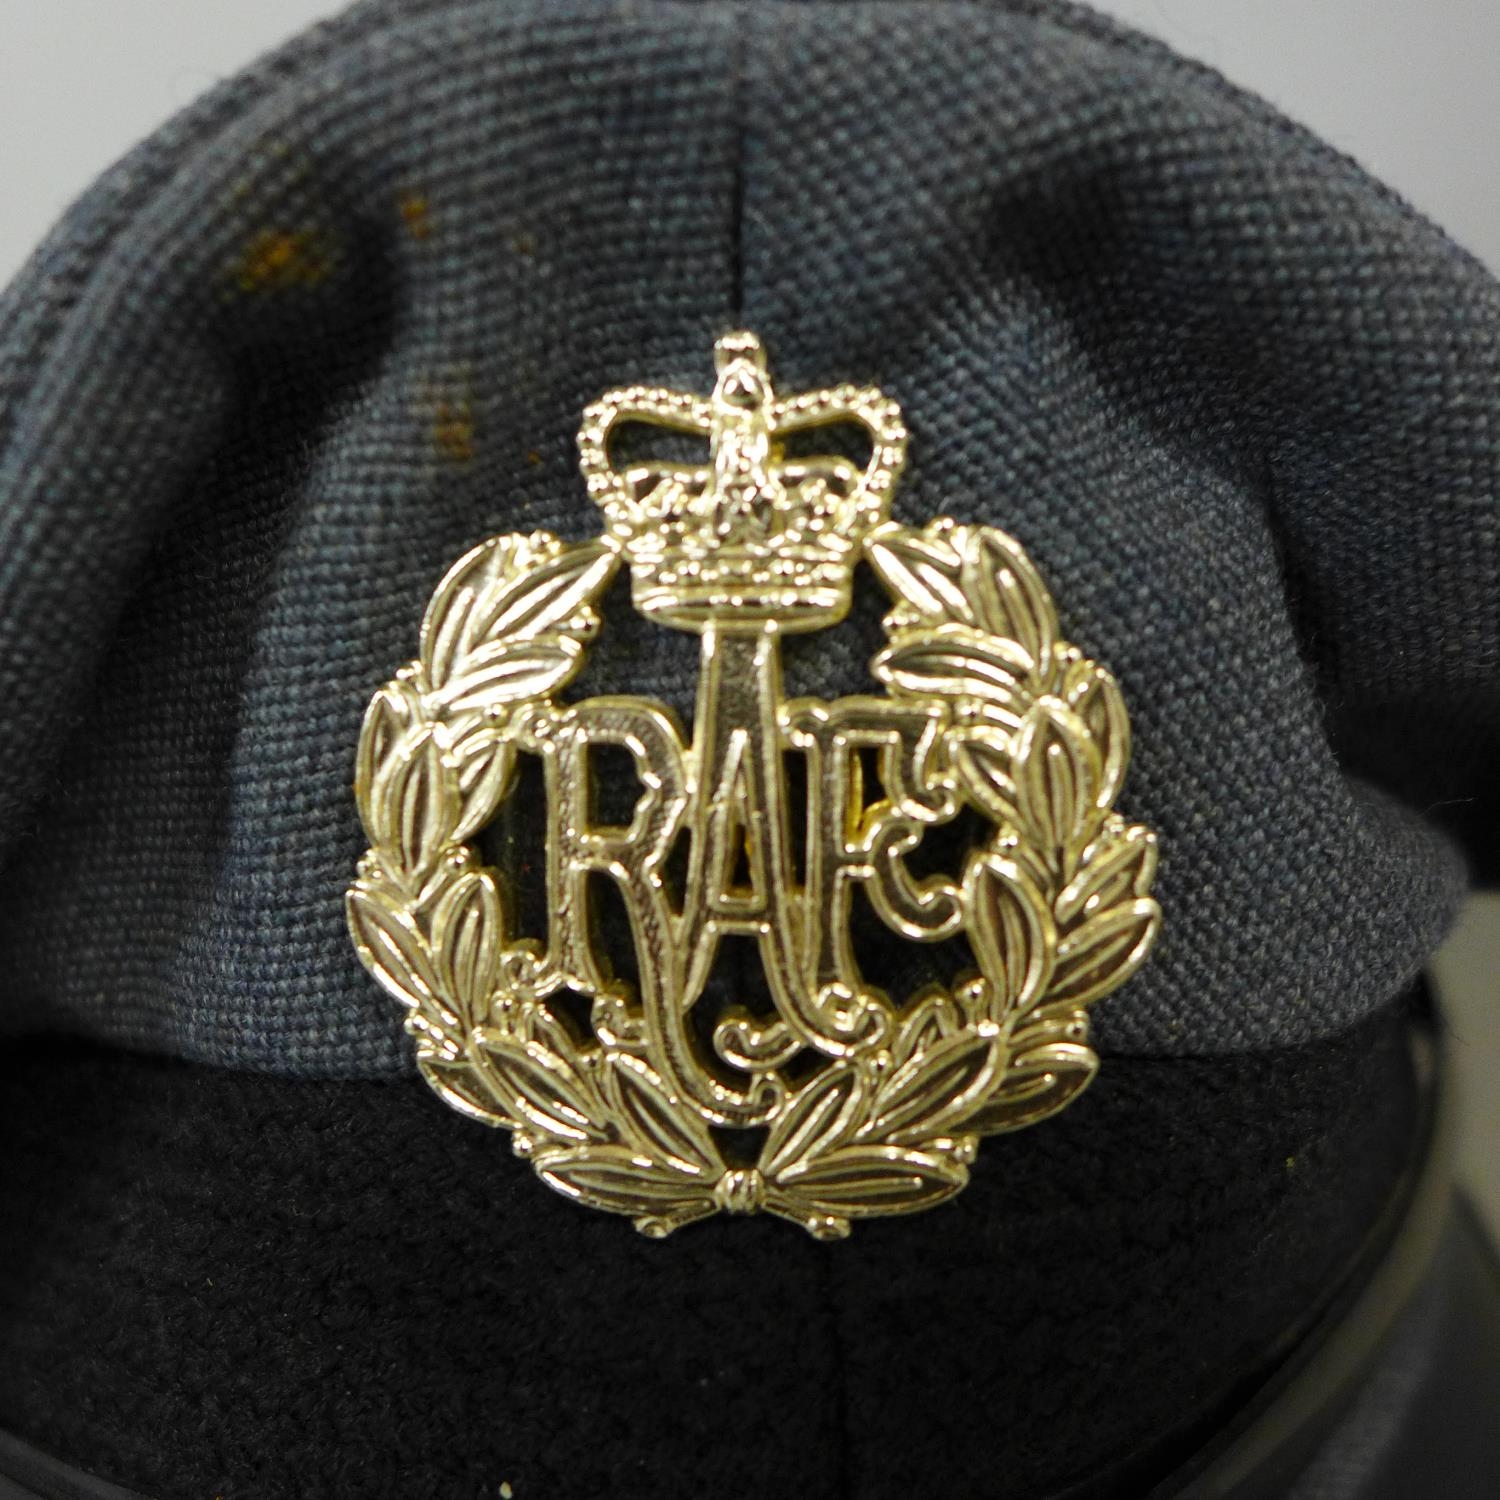 A RAF service peaked cap with badge (size 58)